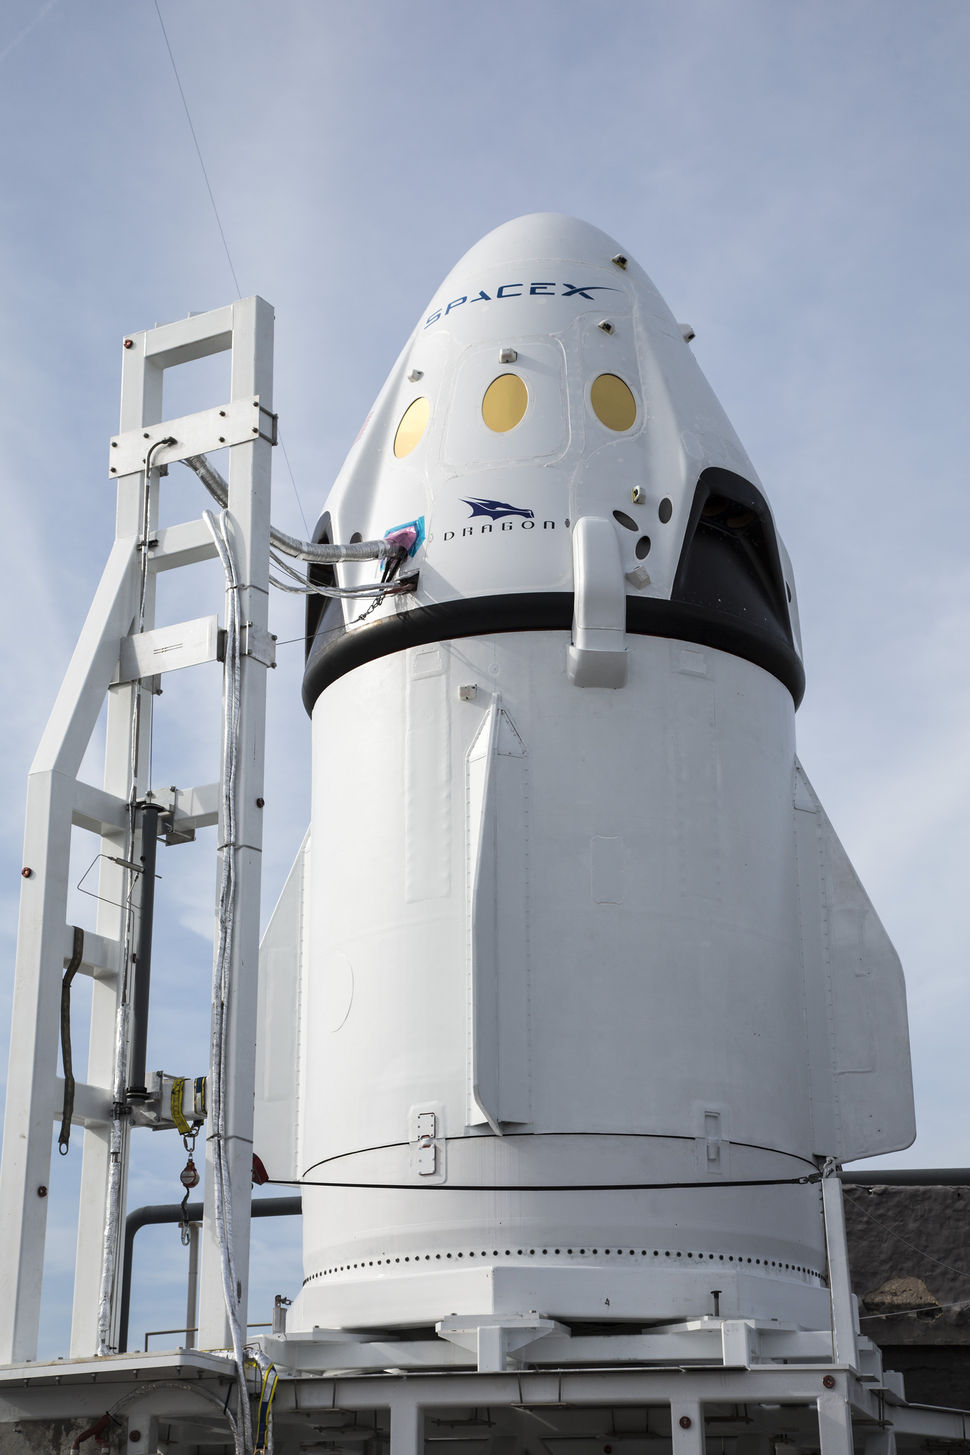 image from: http://www.spacex.com/media-gallery/detail/129171/5276